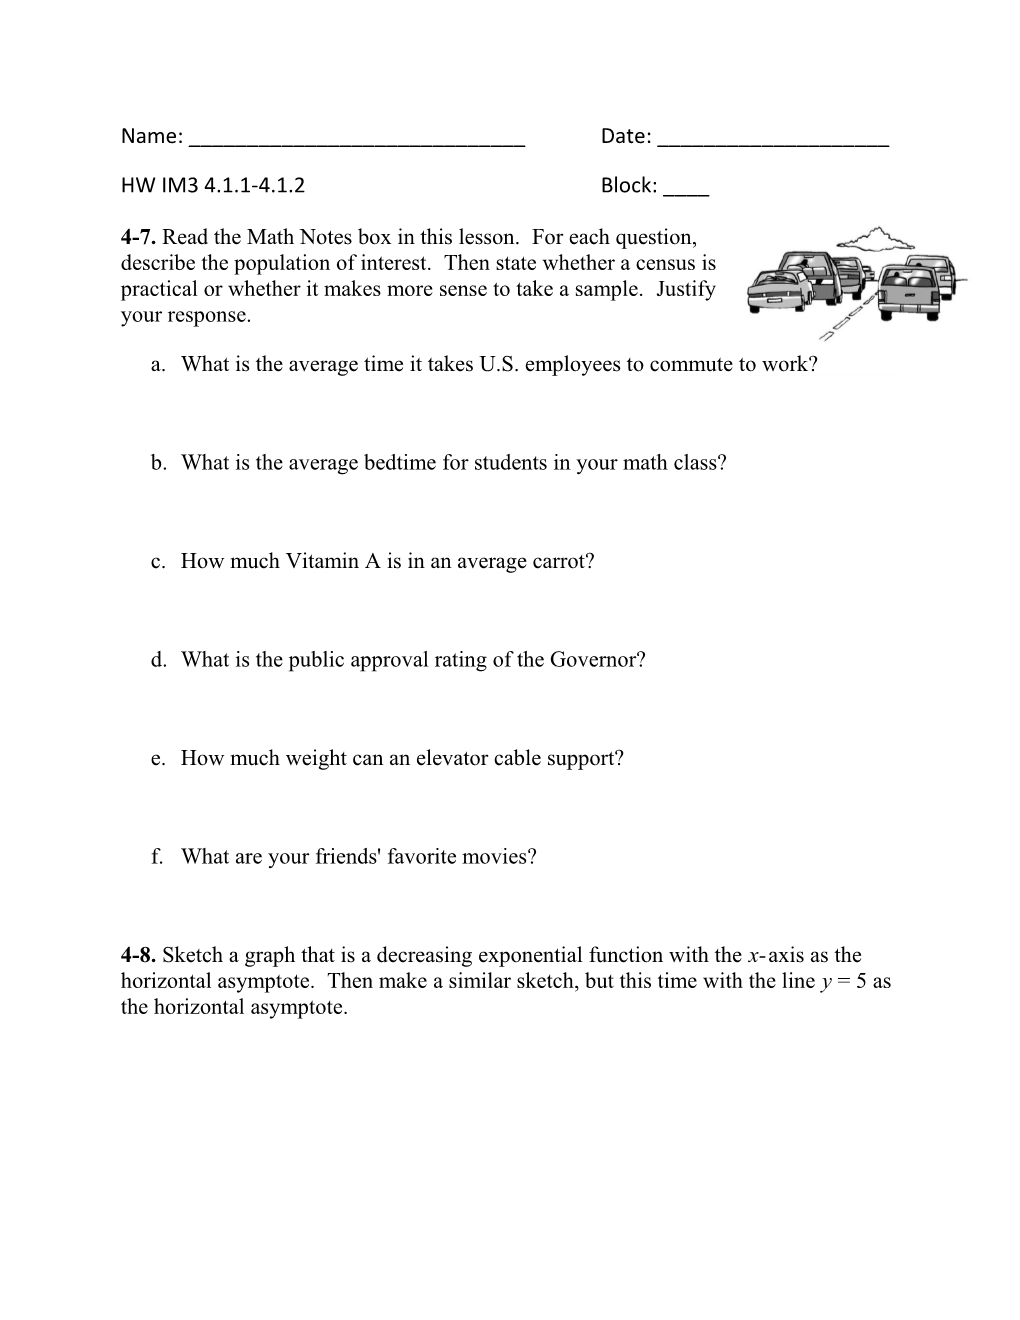 4-7.Read the Math Notes Box in This Lesson. for Each Question, Describe the Population